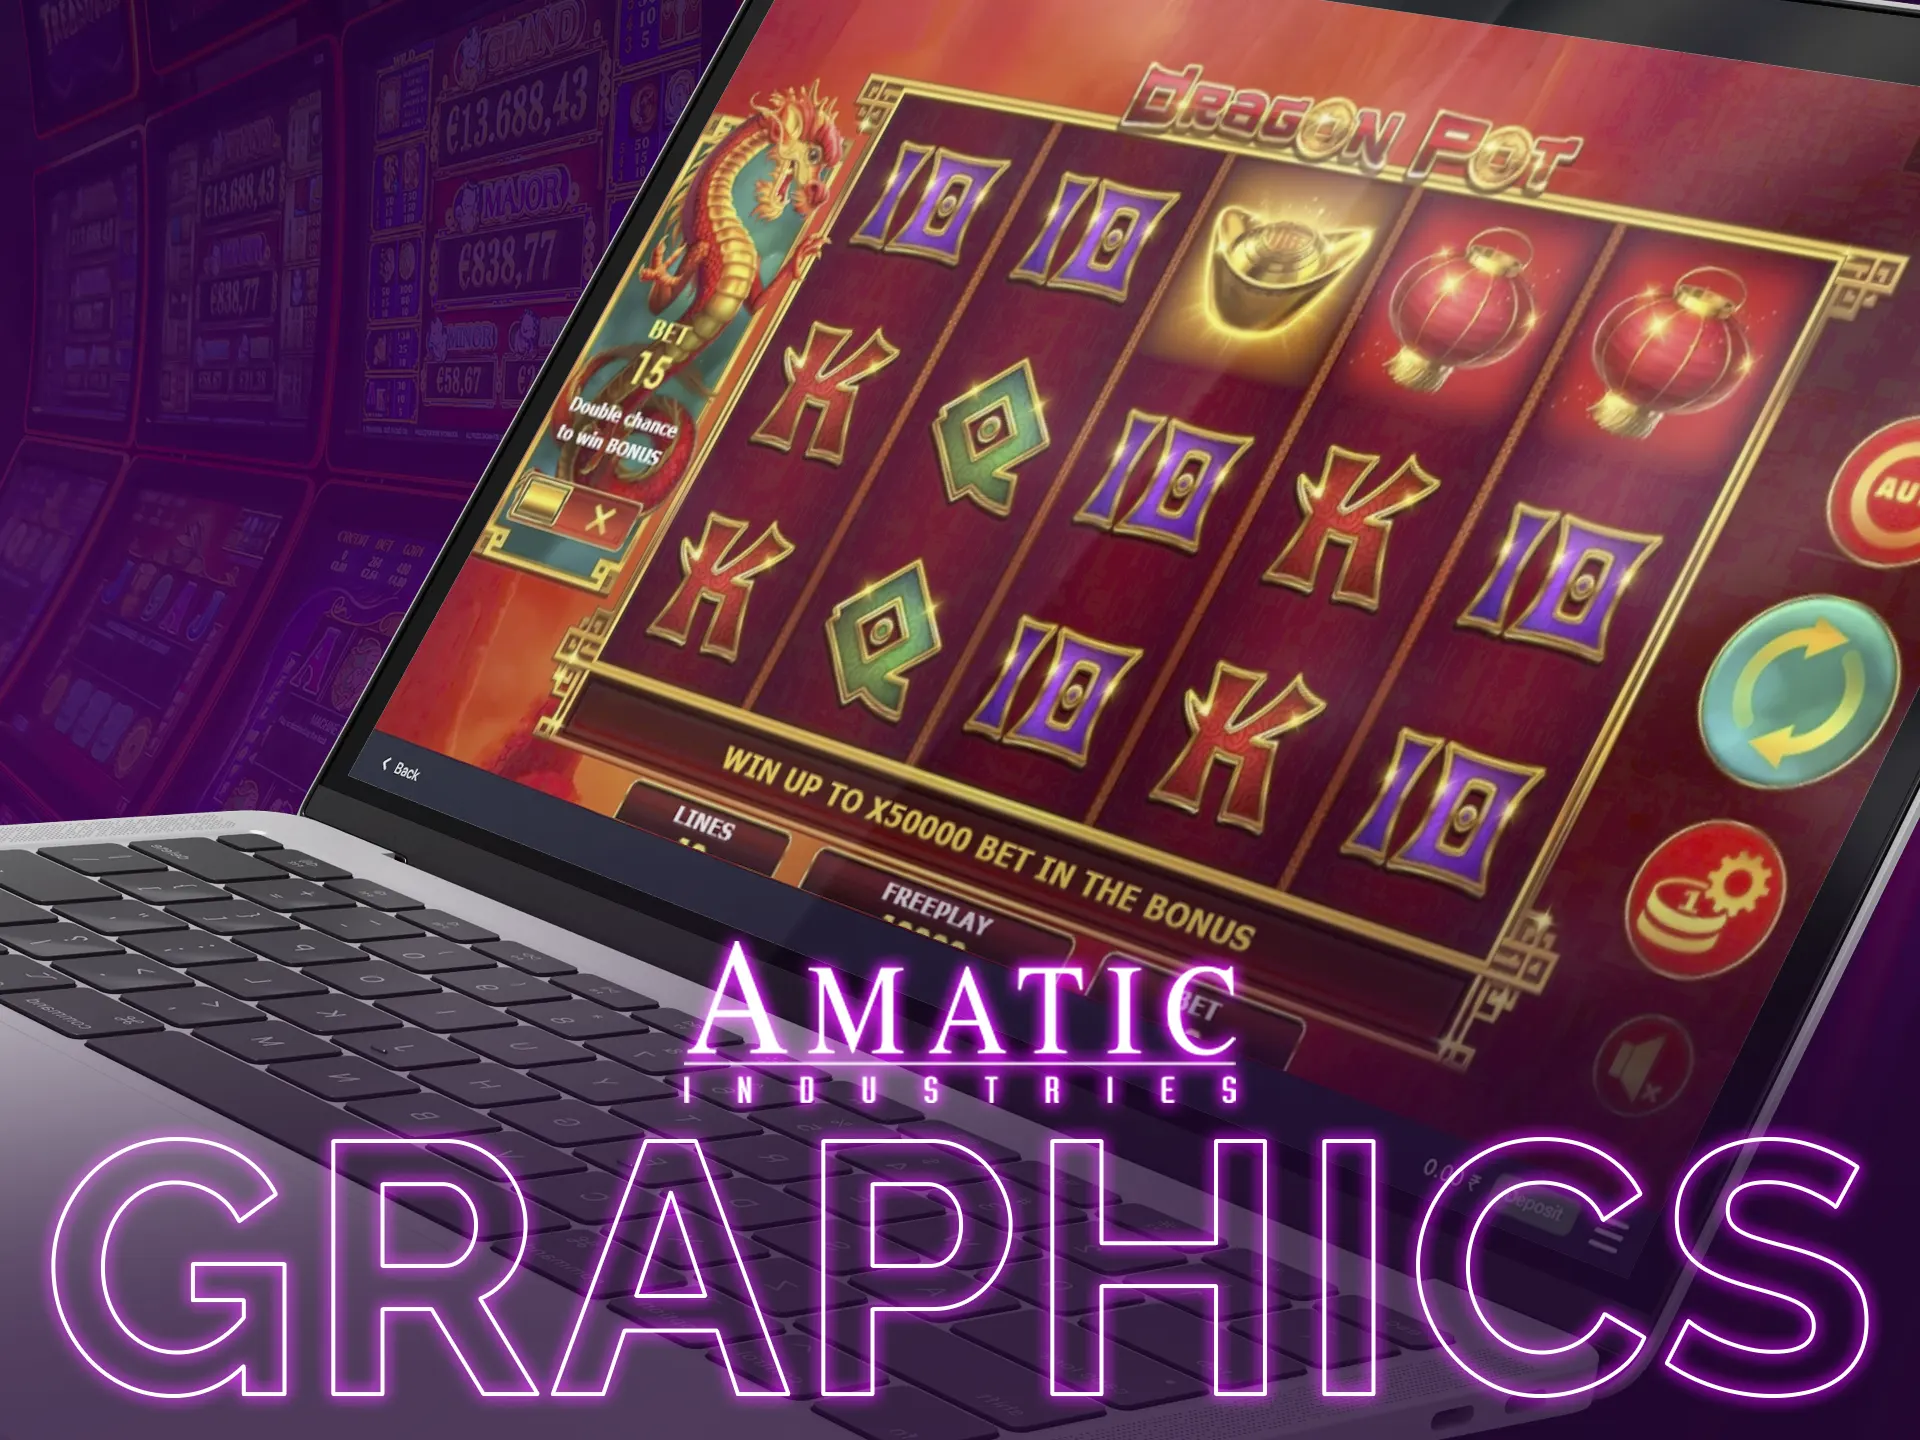 Amatic has a colorful, classic, neon, minimal gameplay.